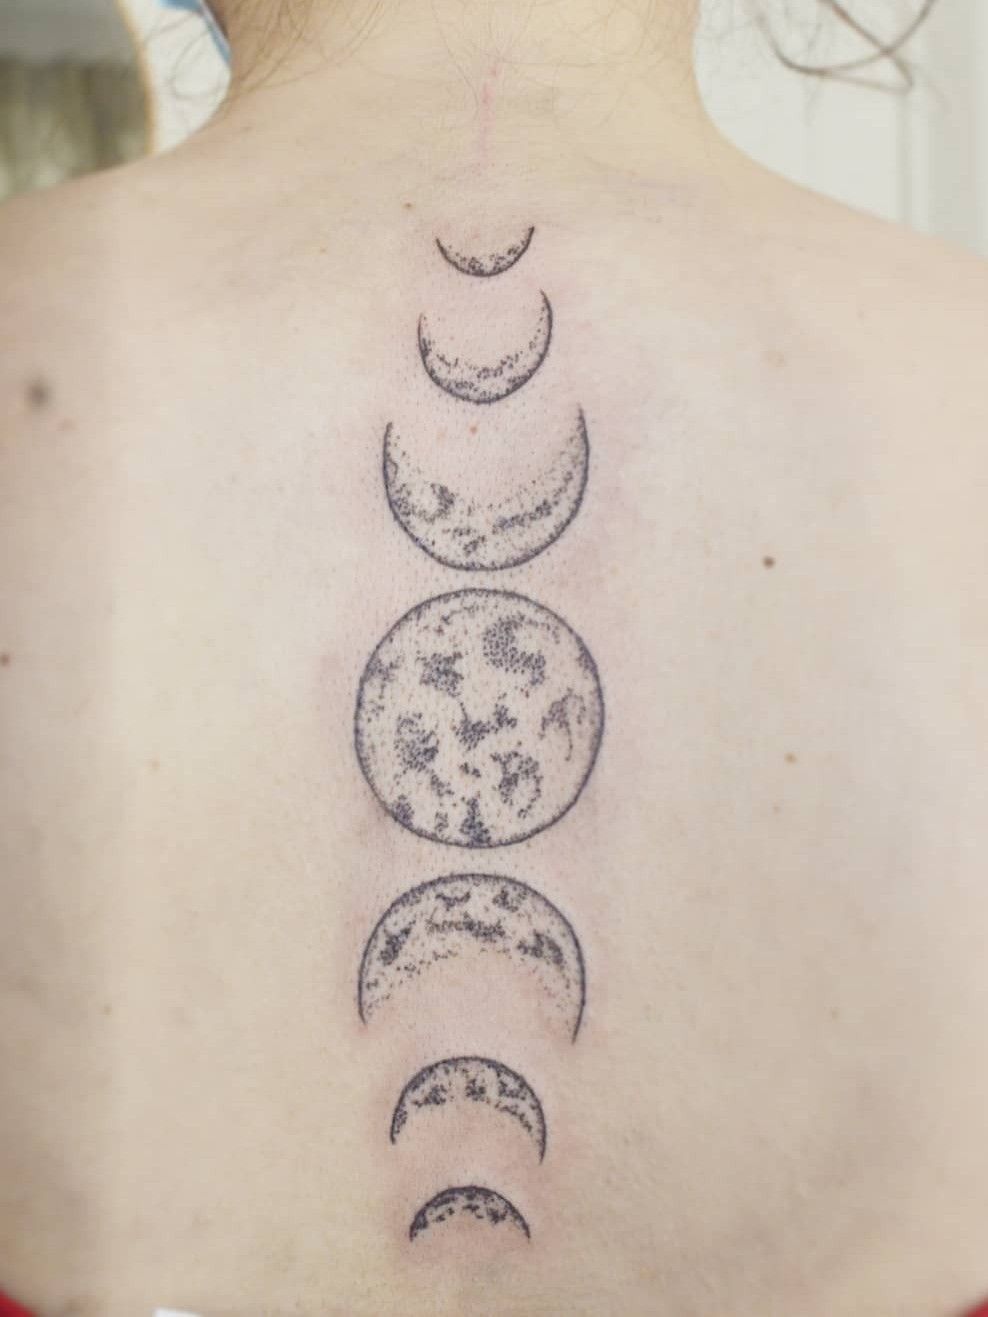 Moon phases tattoo located on the ankle, minimalistic